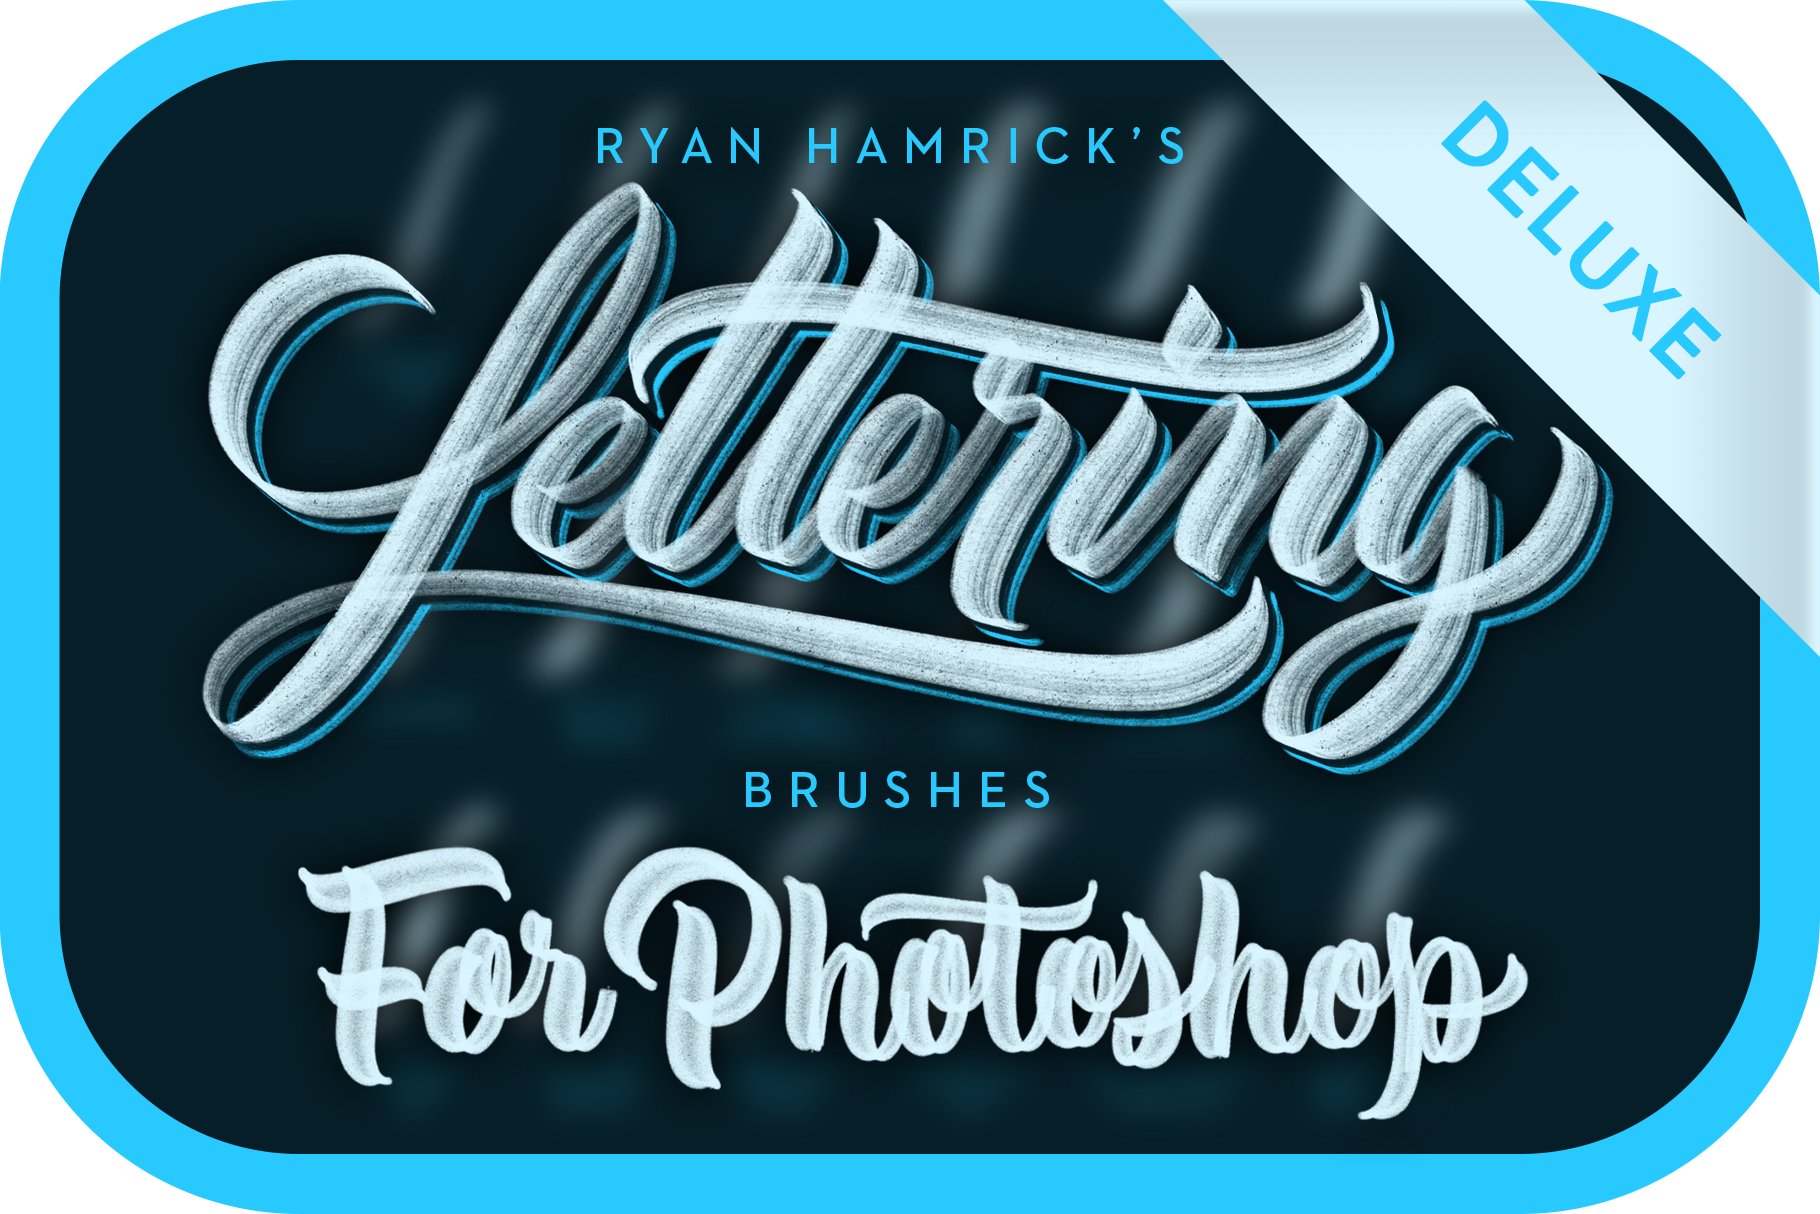 PS Lettering Brushes (Deluxe)cover image.